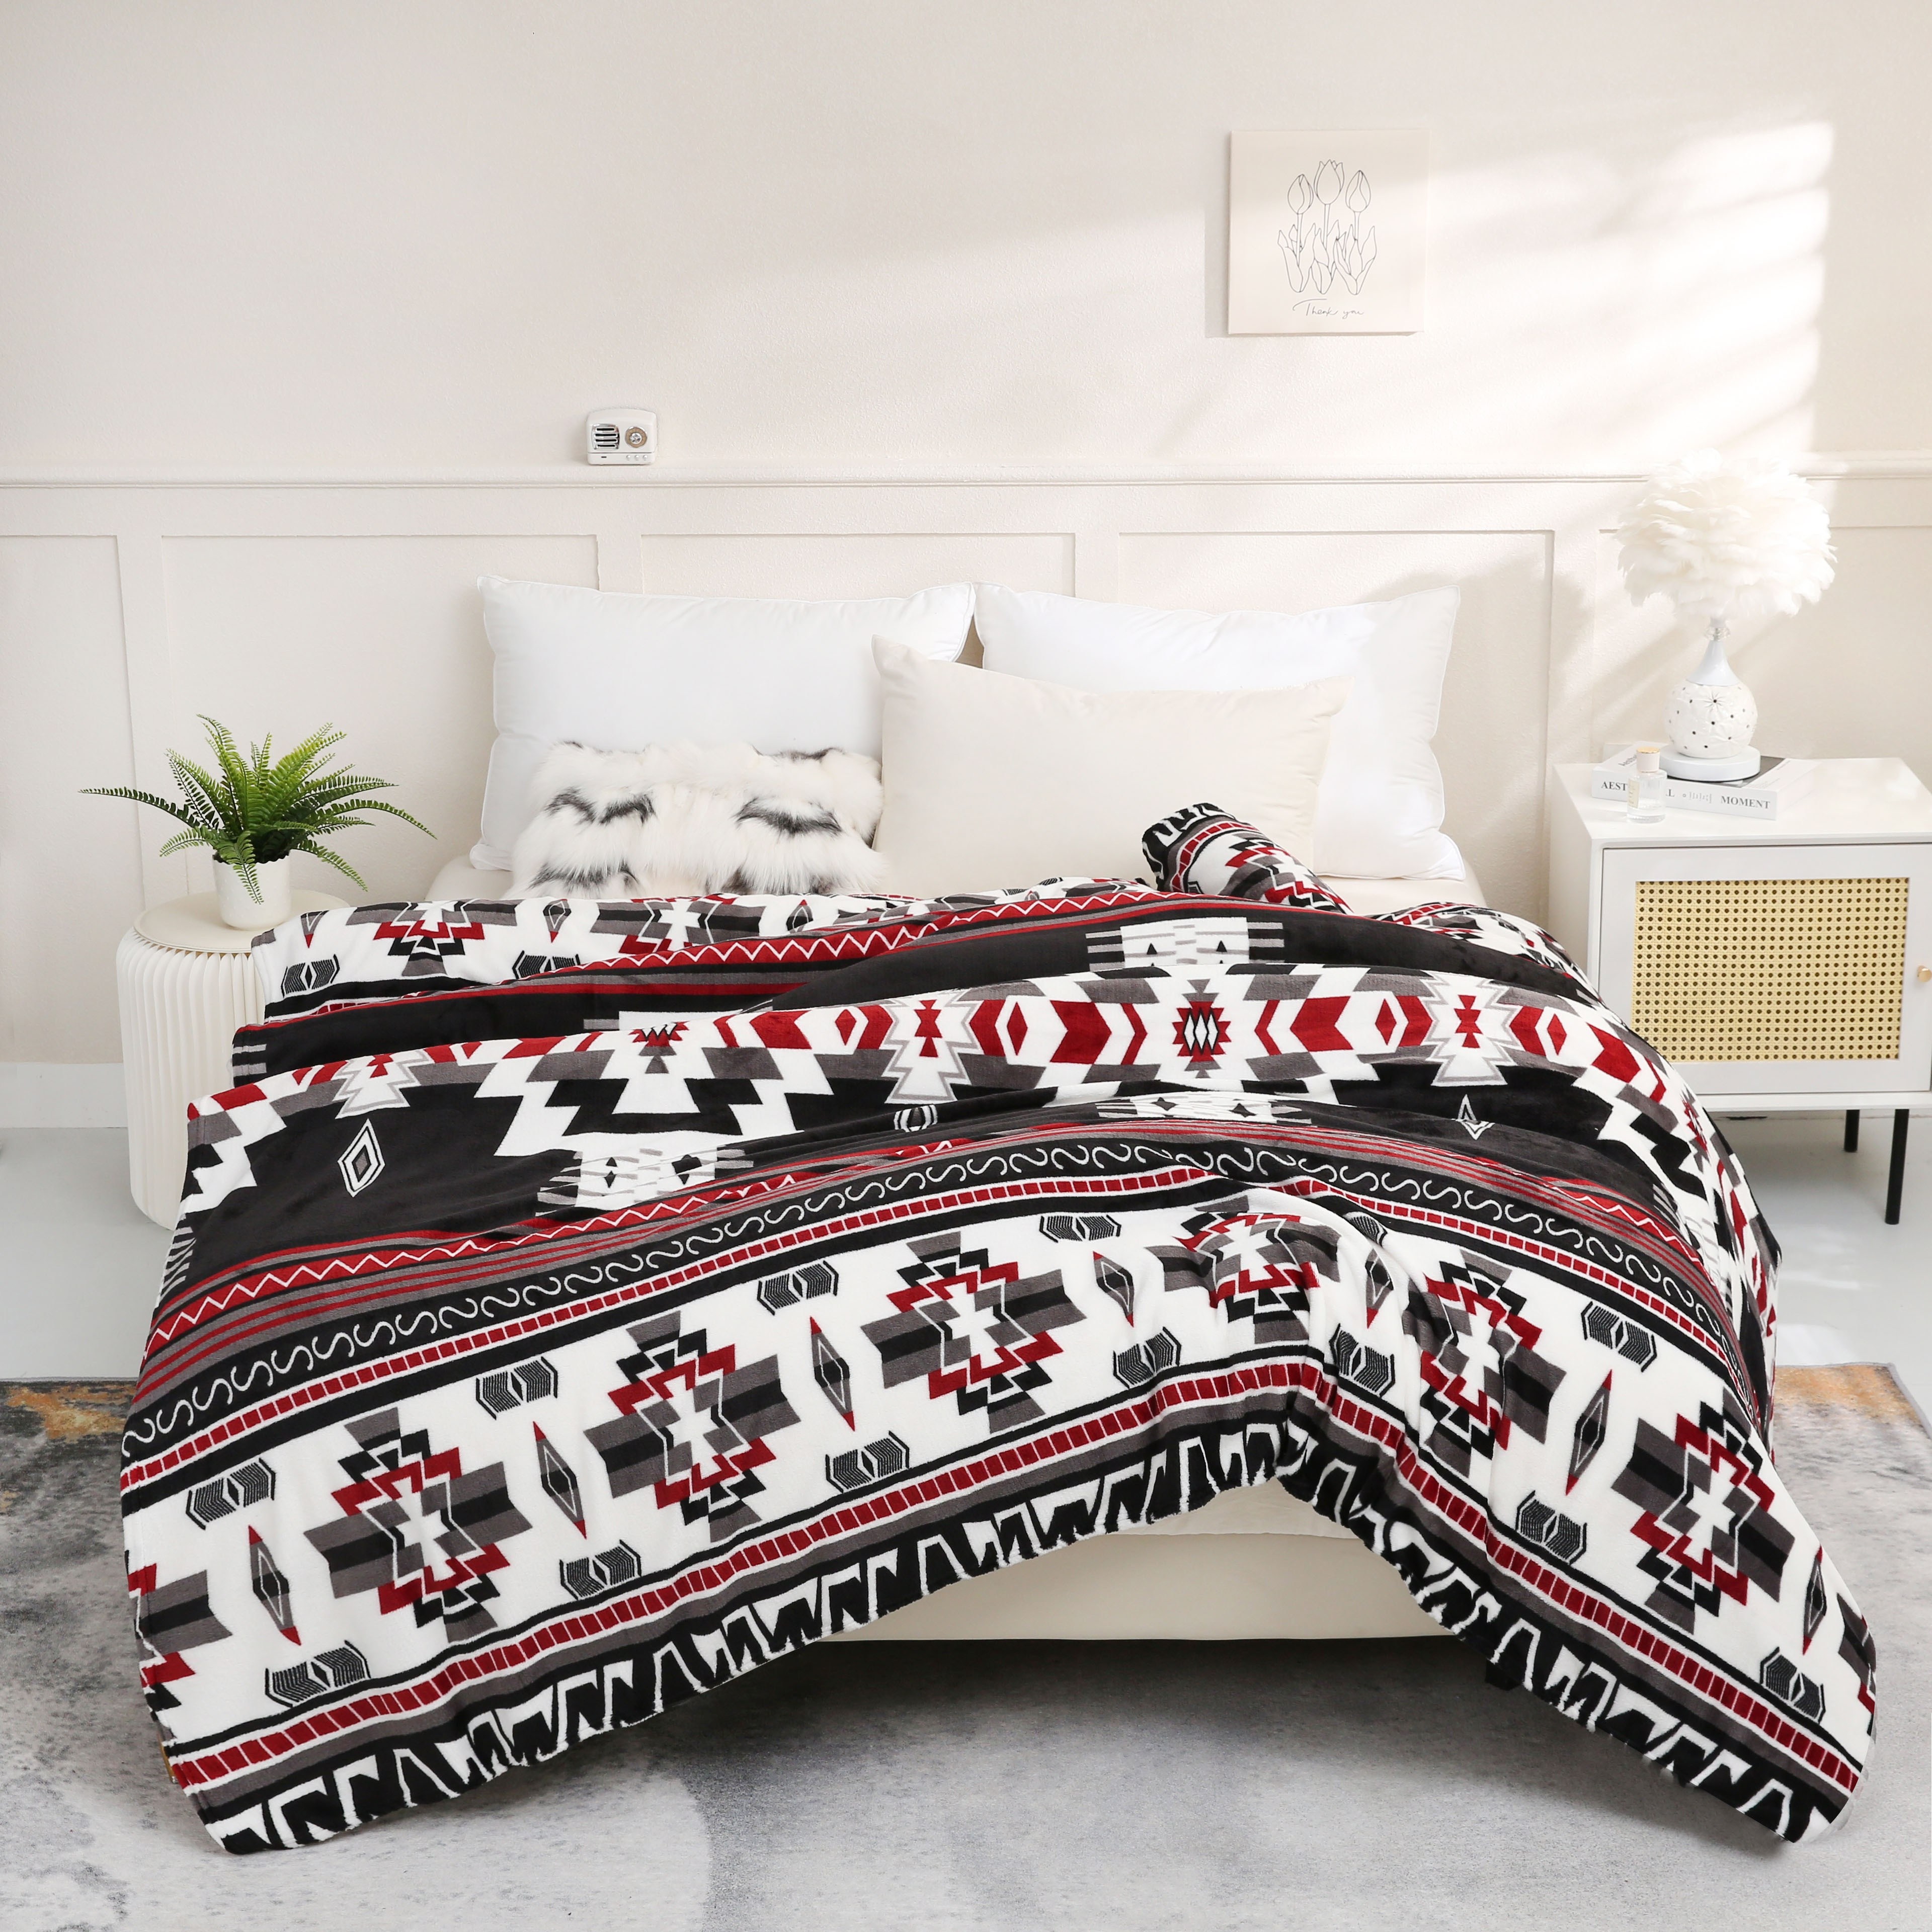 

1pc Boho Pattern Blanket, 200gsm Bohemian Ethnic Style Flannel Blanket For All Season, Soft Warm Throw Blanket Nap Blanket For Couch Sofa Office Bed Office Camping Travelling Home Decor